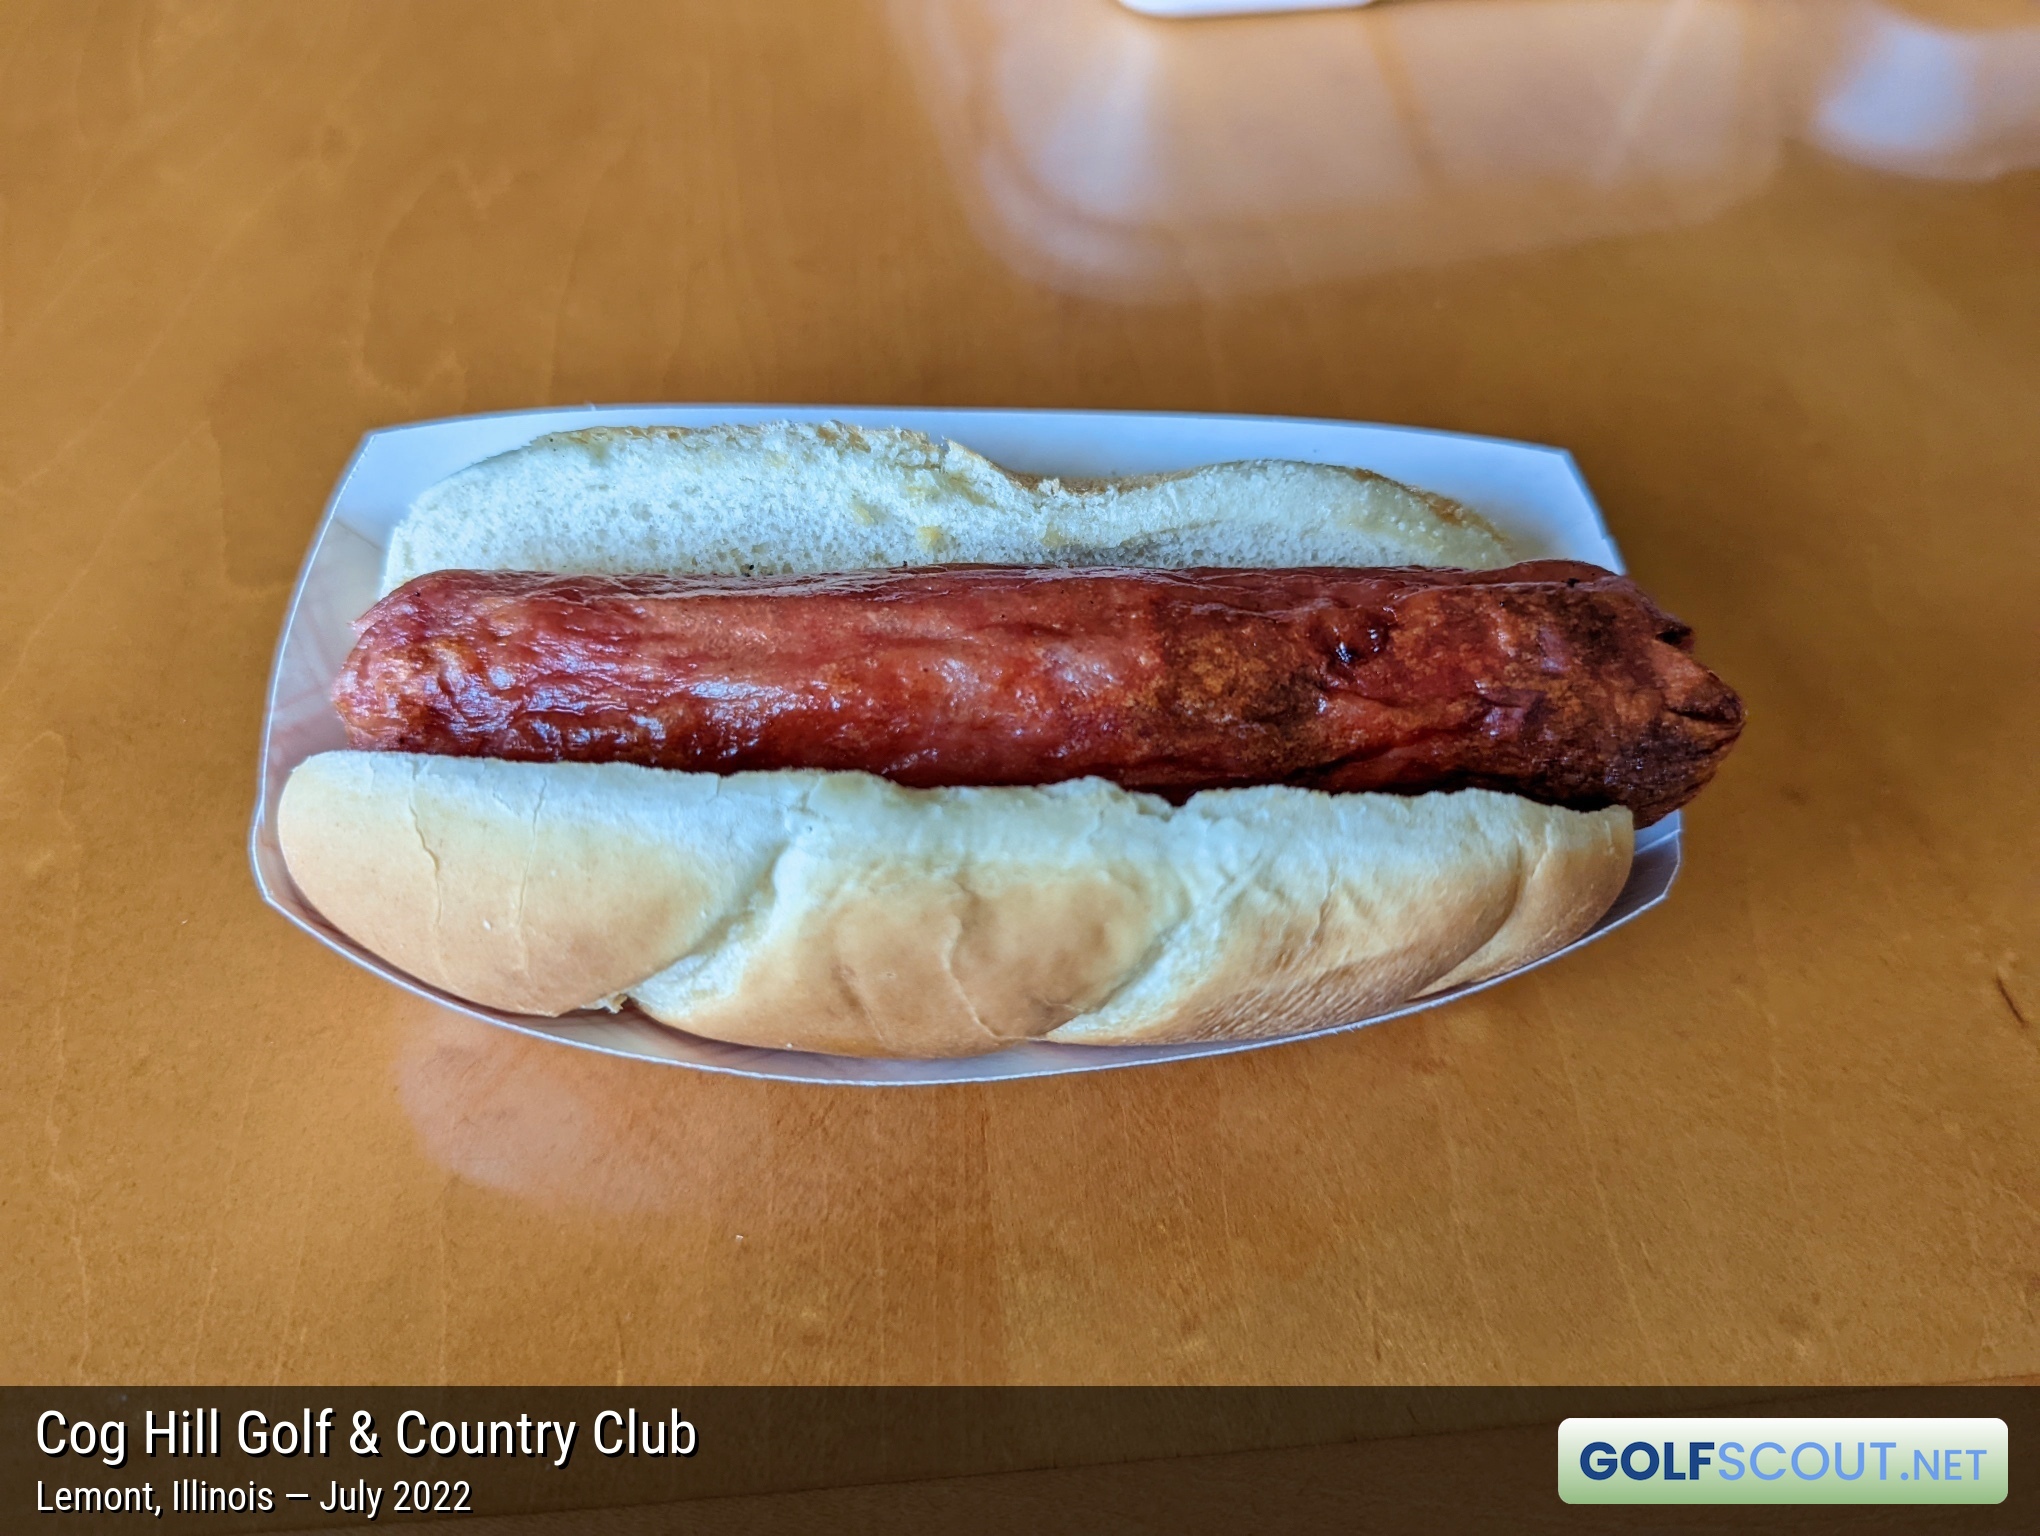 Photo of the food and dining at Cog Hill Course #1 in Lemont, Illinois. Hot dog from Cog Hill. My quest to try a hot dog at every course in 
 the Chicagoland area continues.